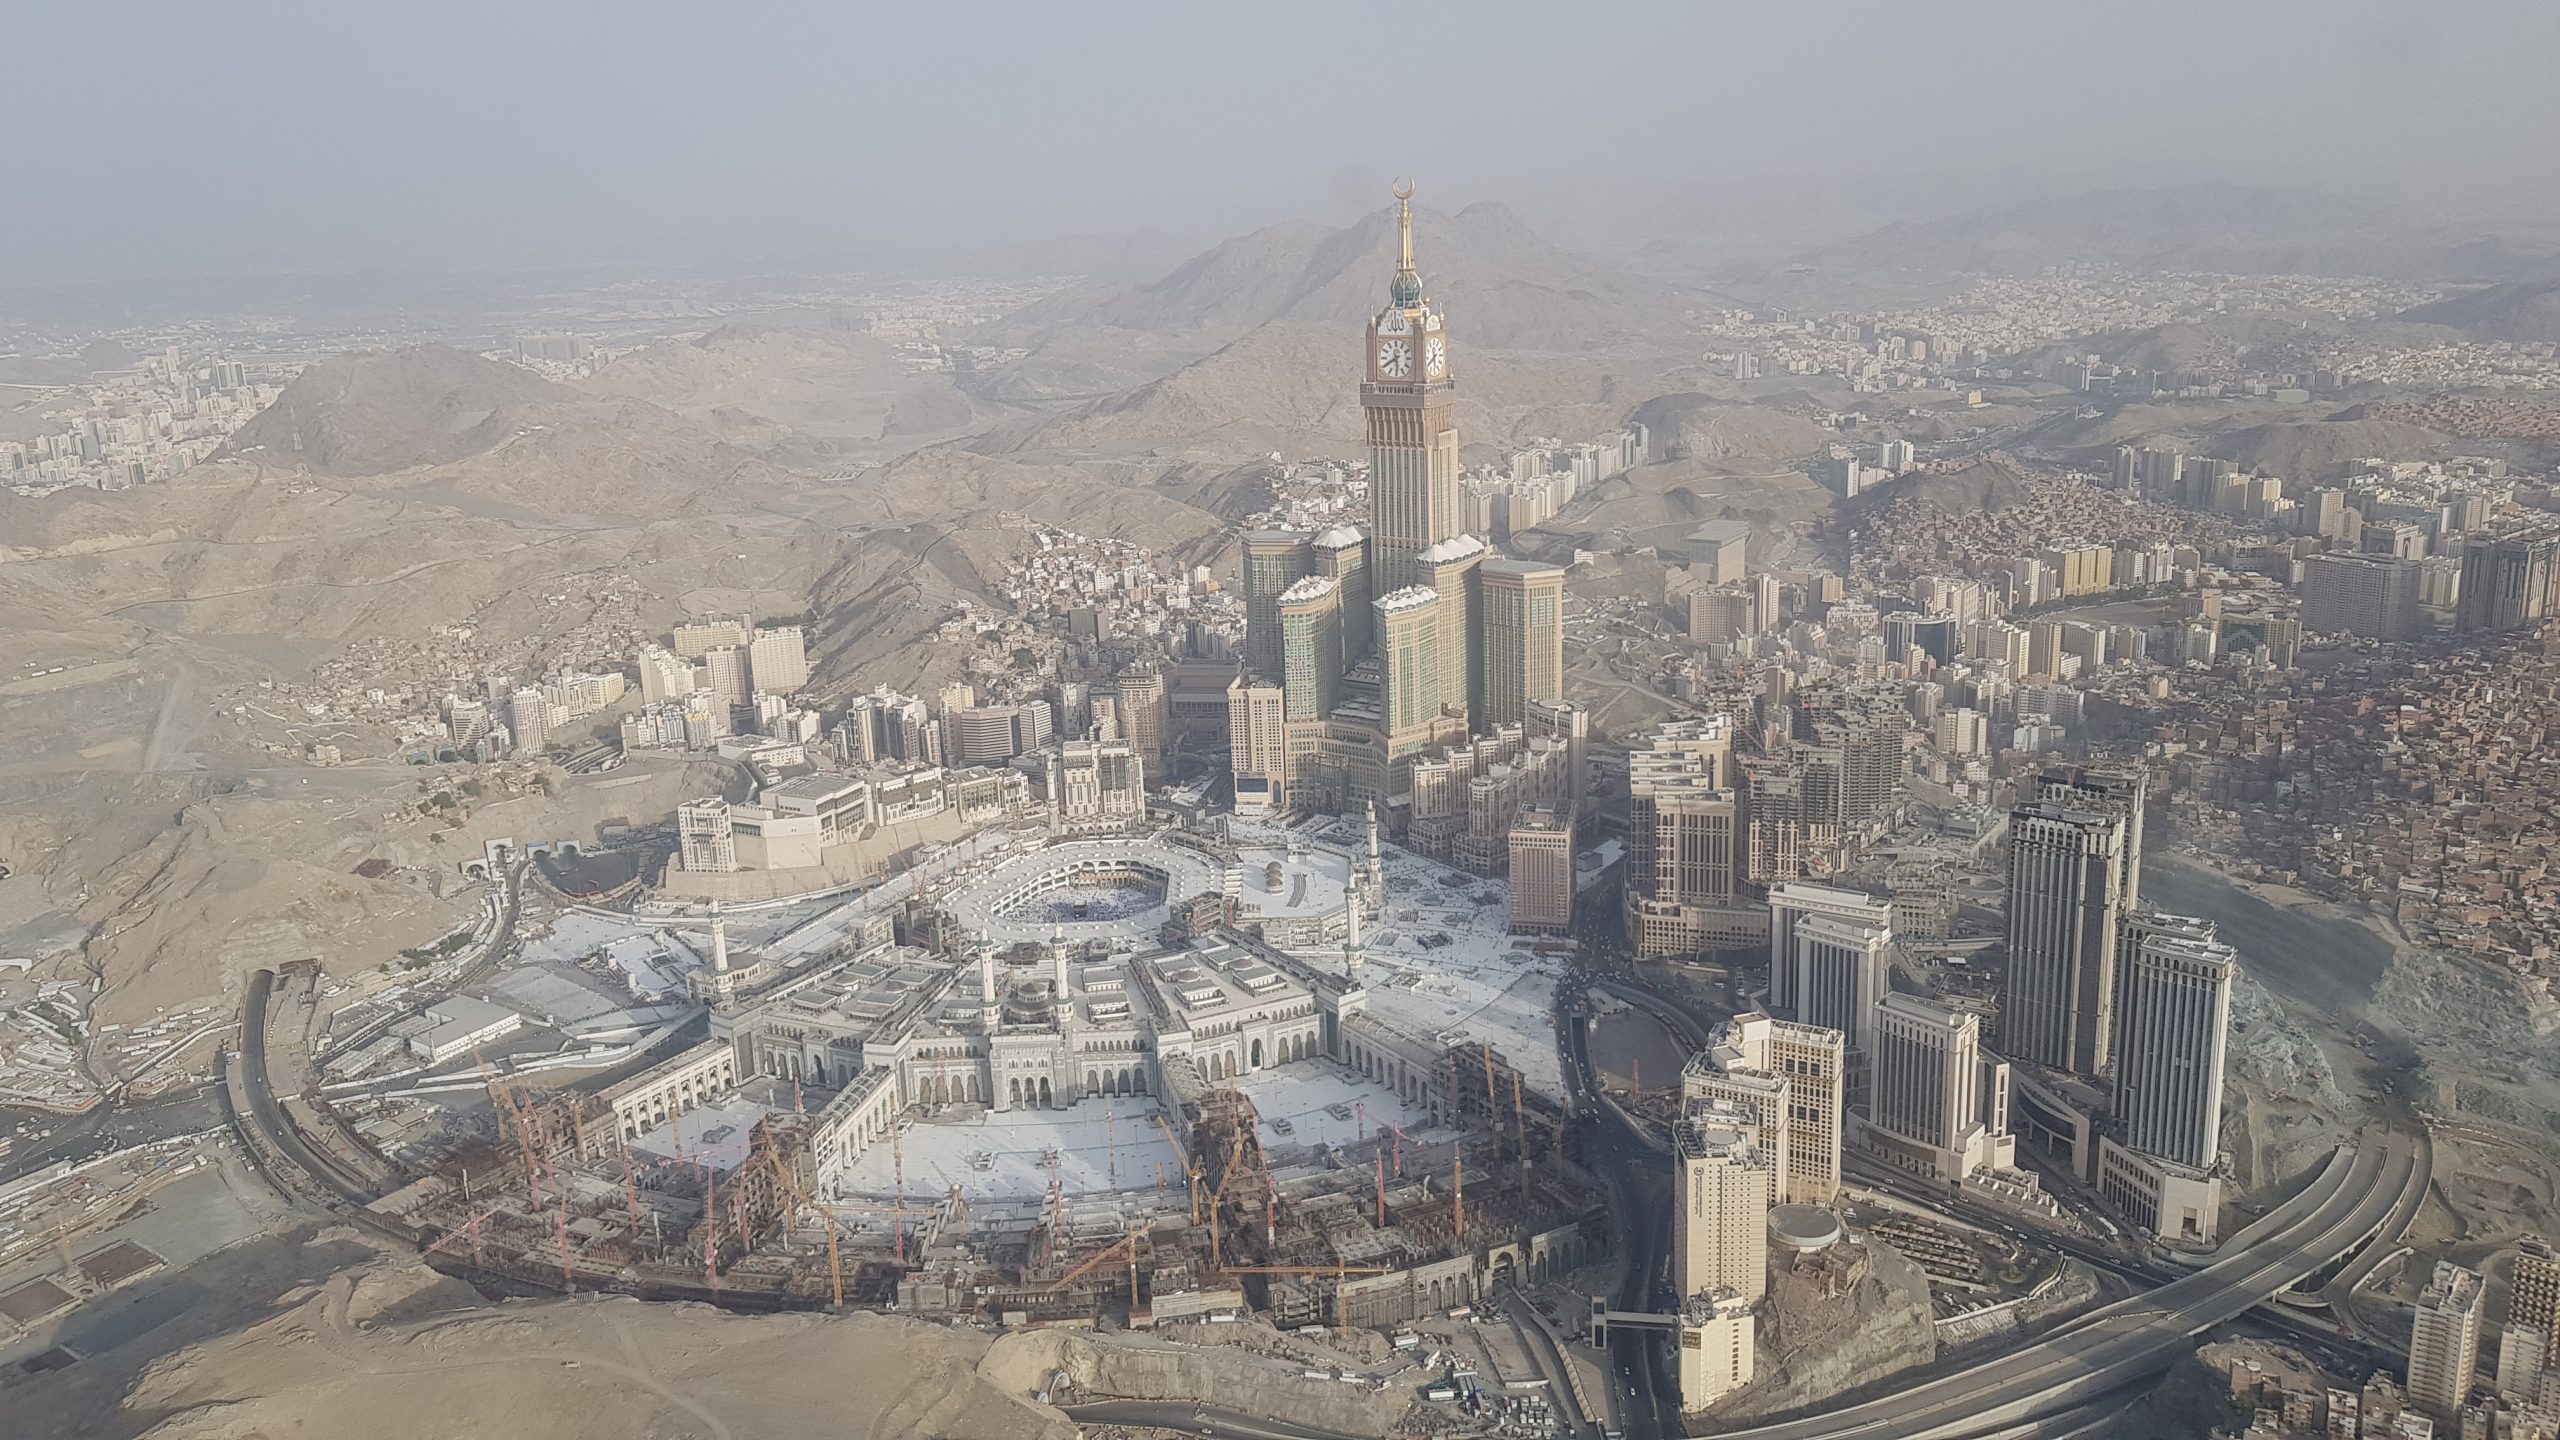 Presidency of two holy mosques to plant trees in Grand Mosque courtyards